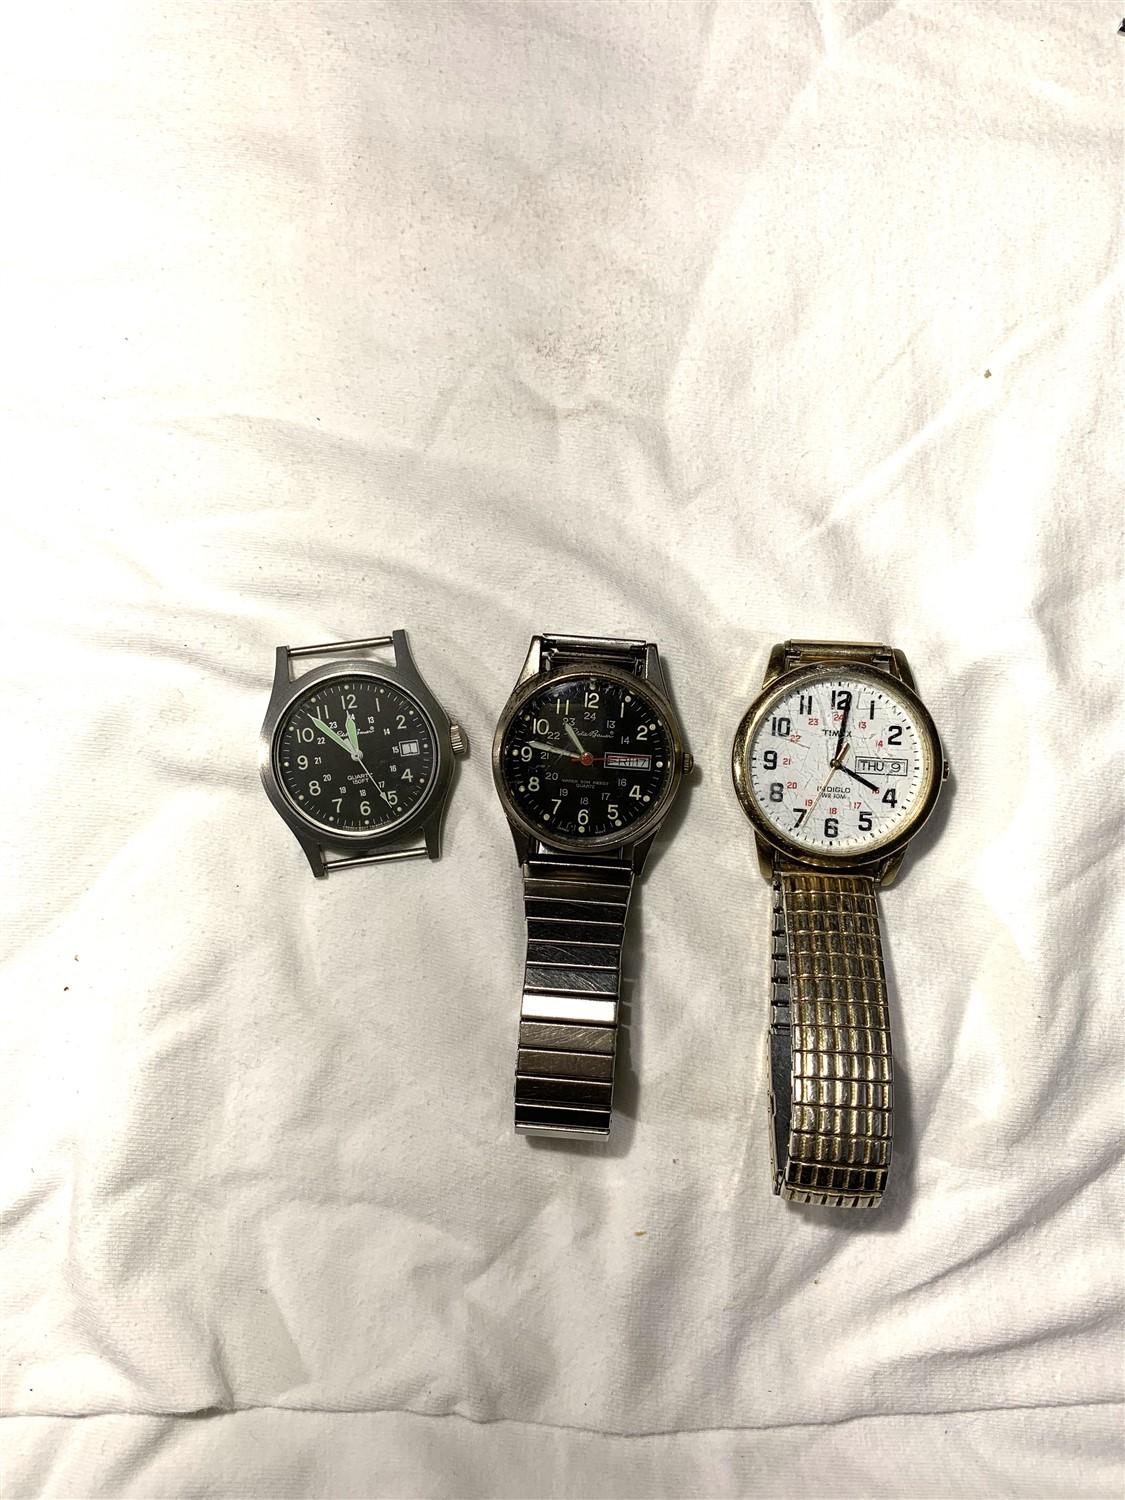 Assortment of Tie Tacks and Watches